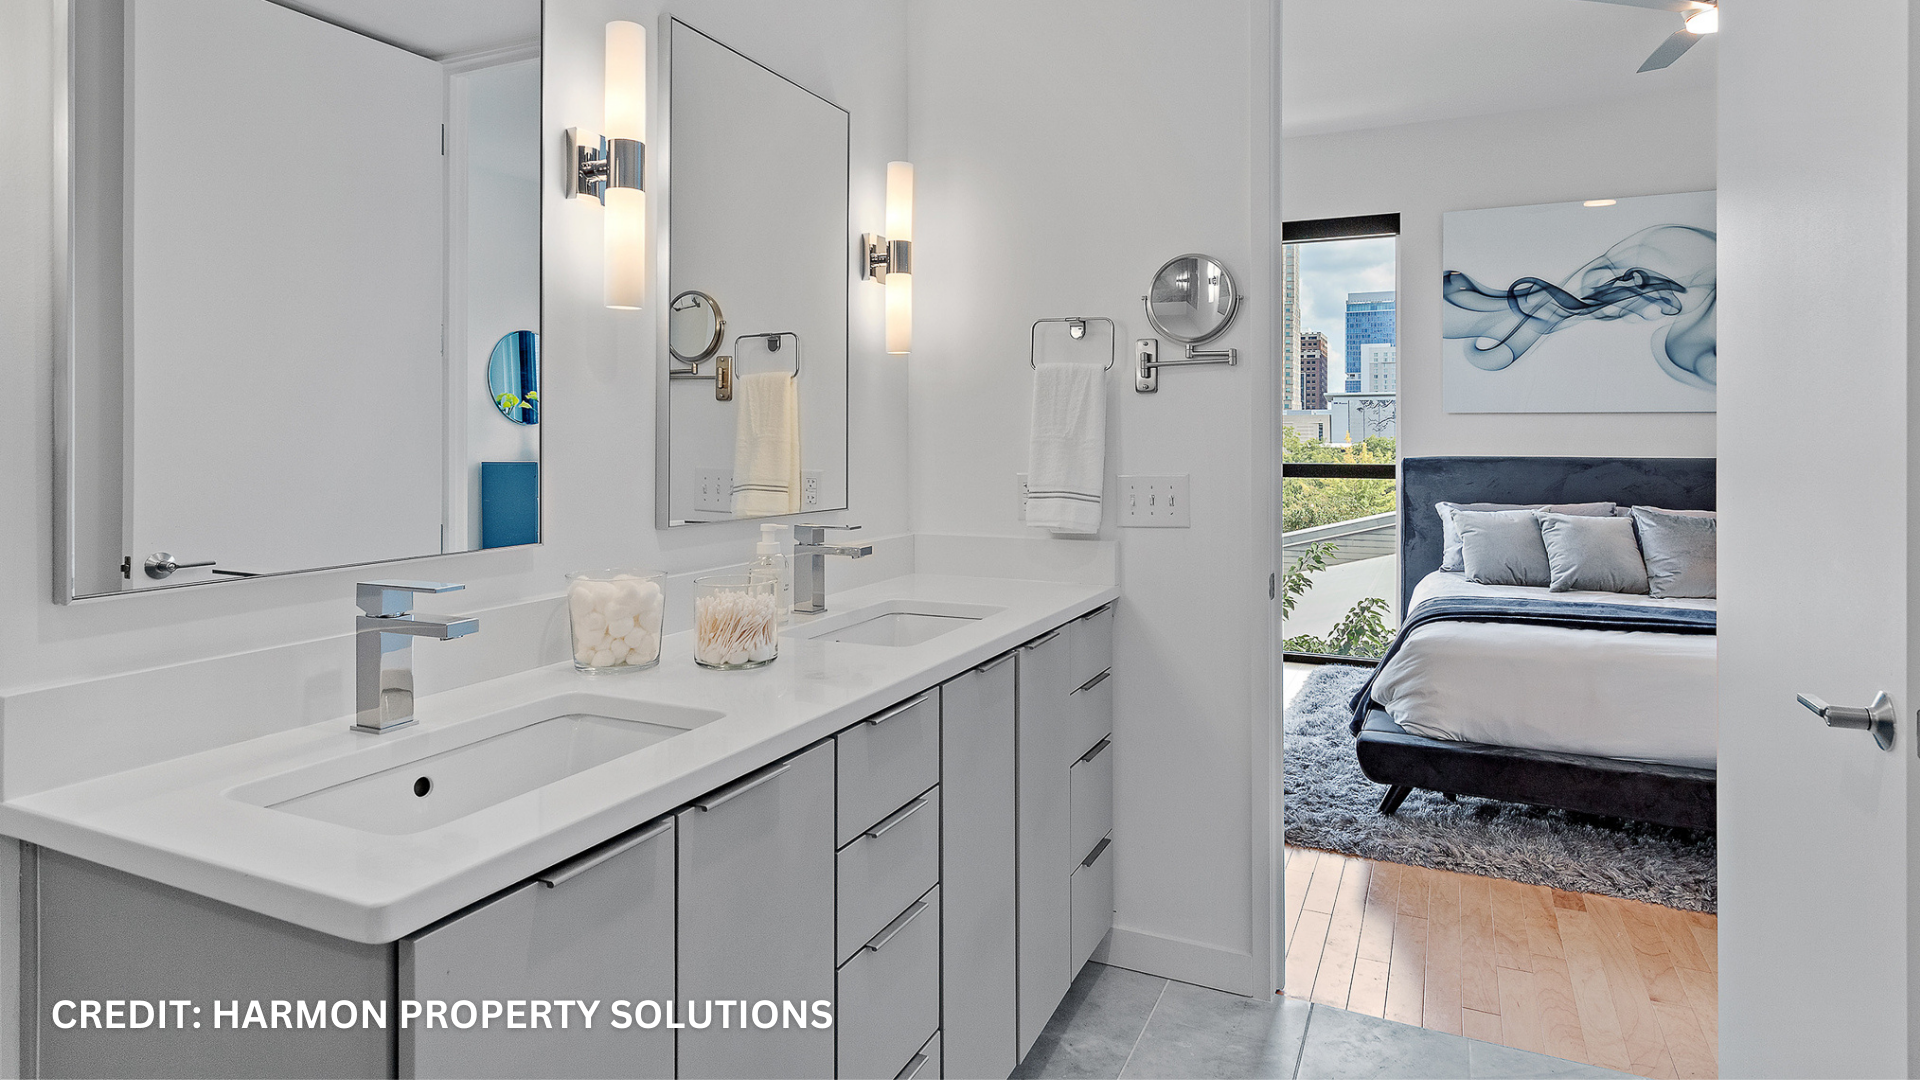 Modern grey and white bathroom real estate photography